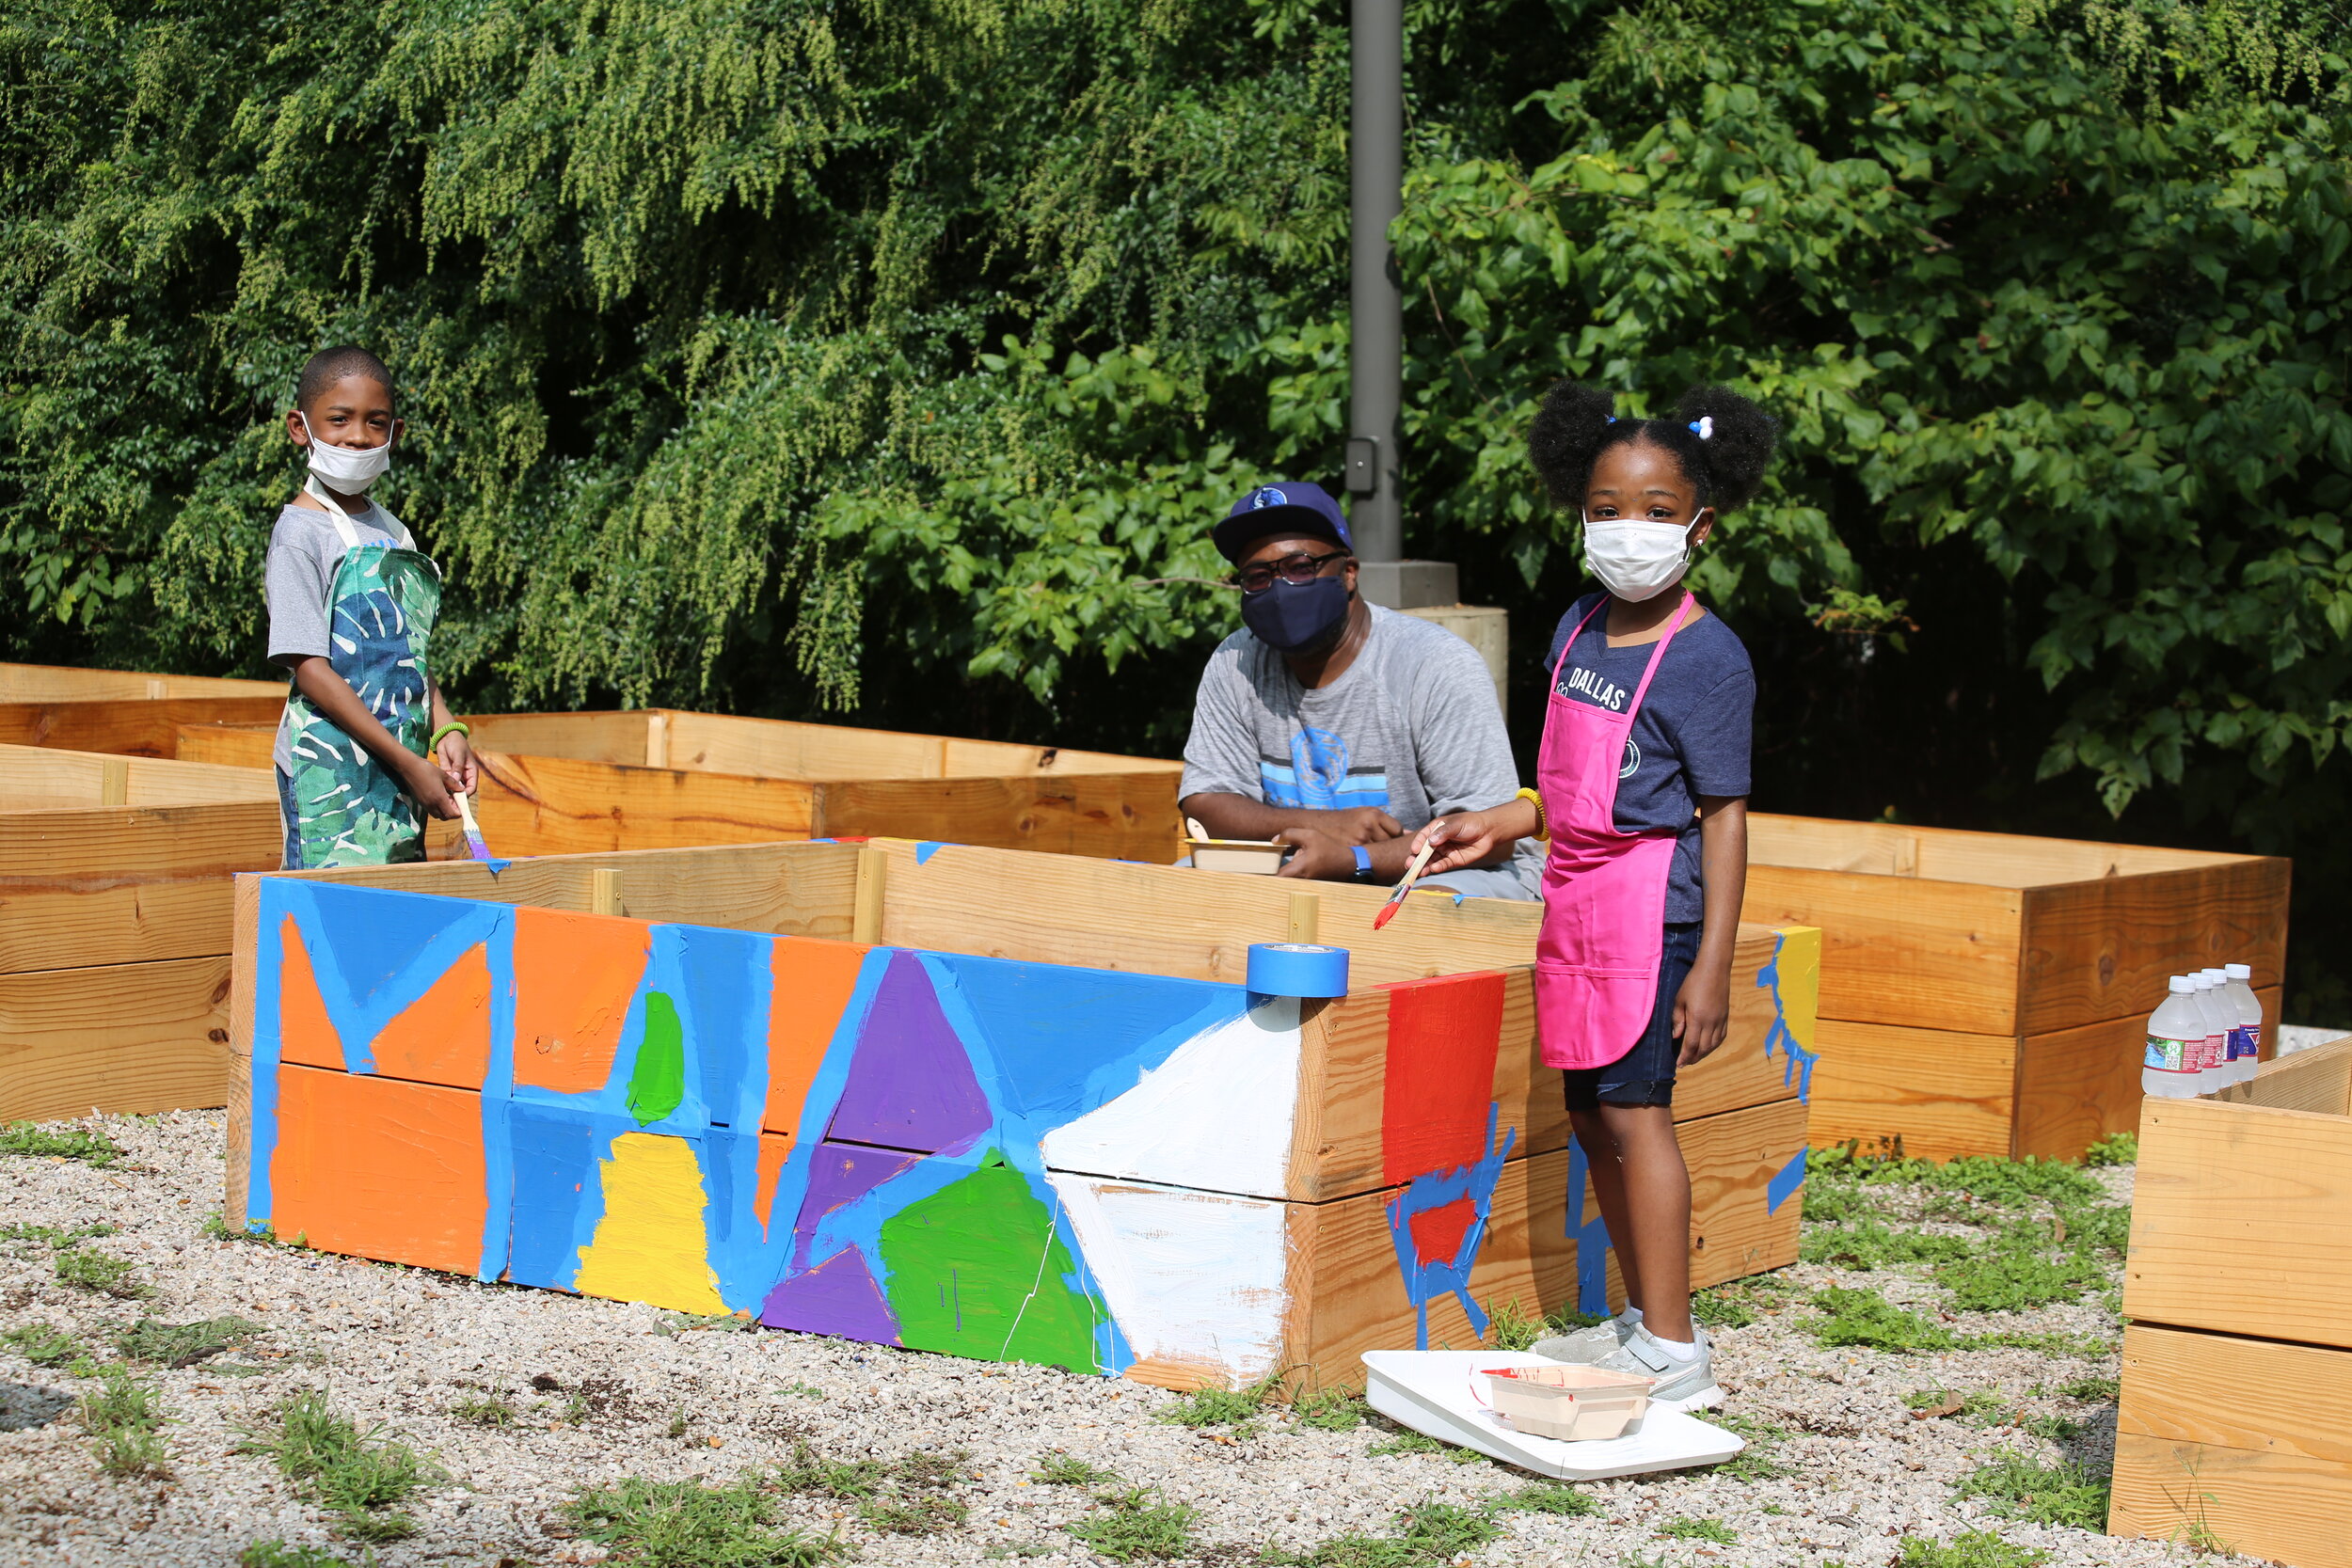 Nakia Douglas and his children painting garden boxes at The Mark Cuban Heroes Center.